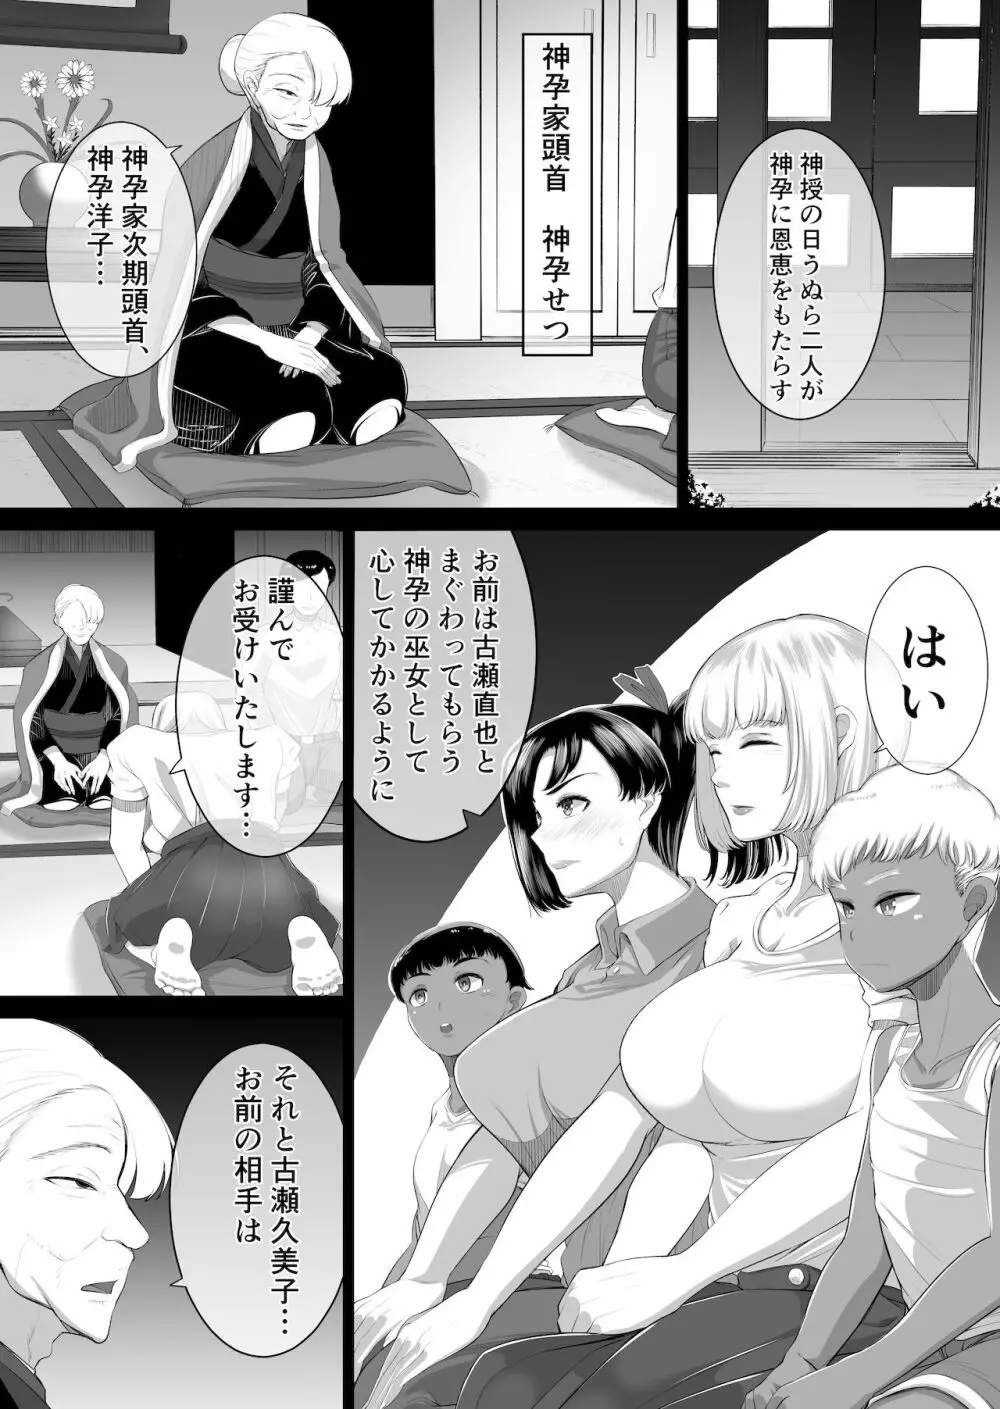 The 神孕村～やっくをやっつけろの巻～ Page.10